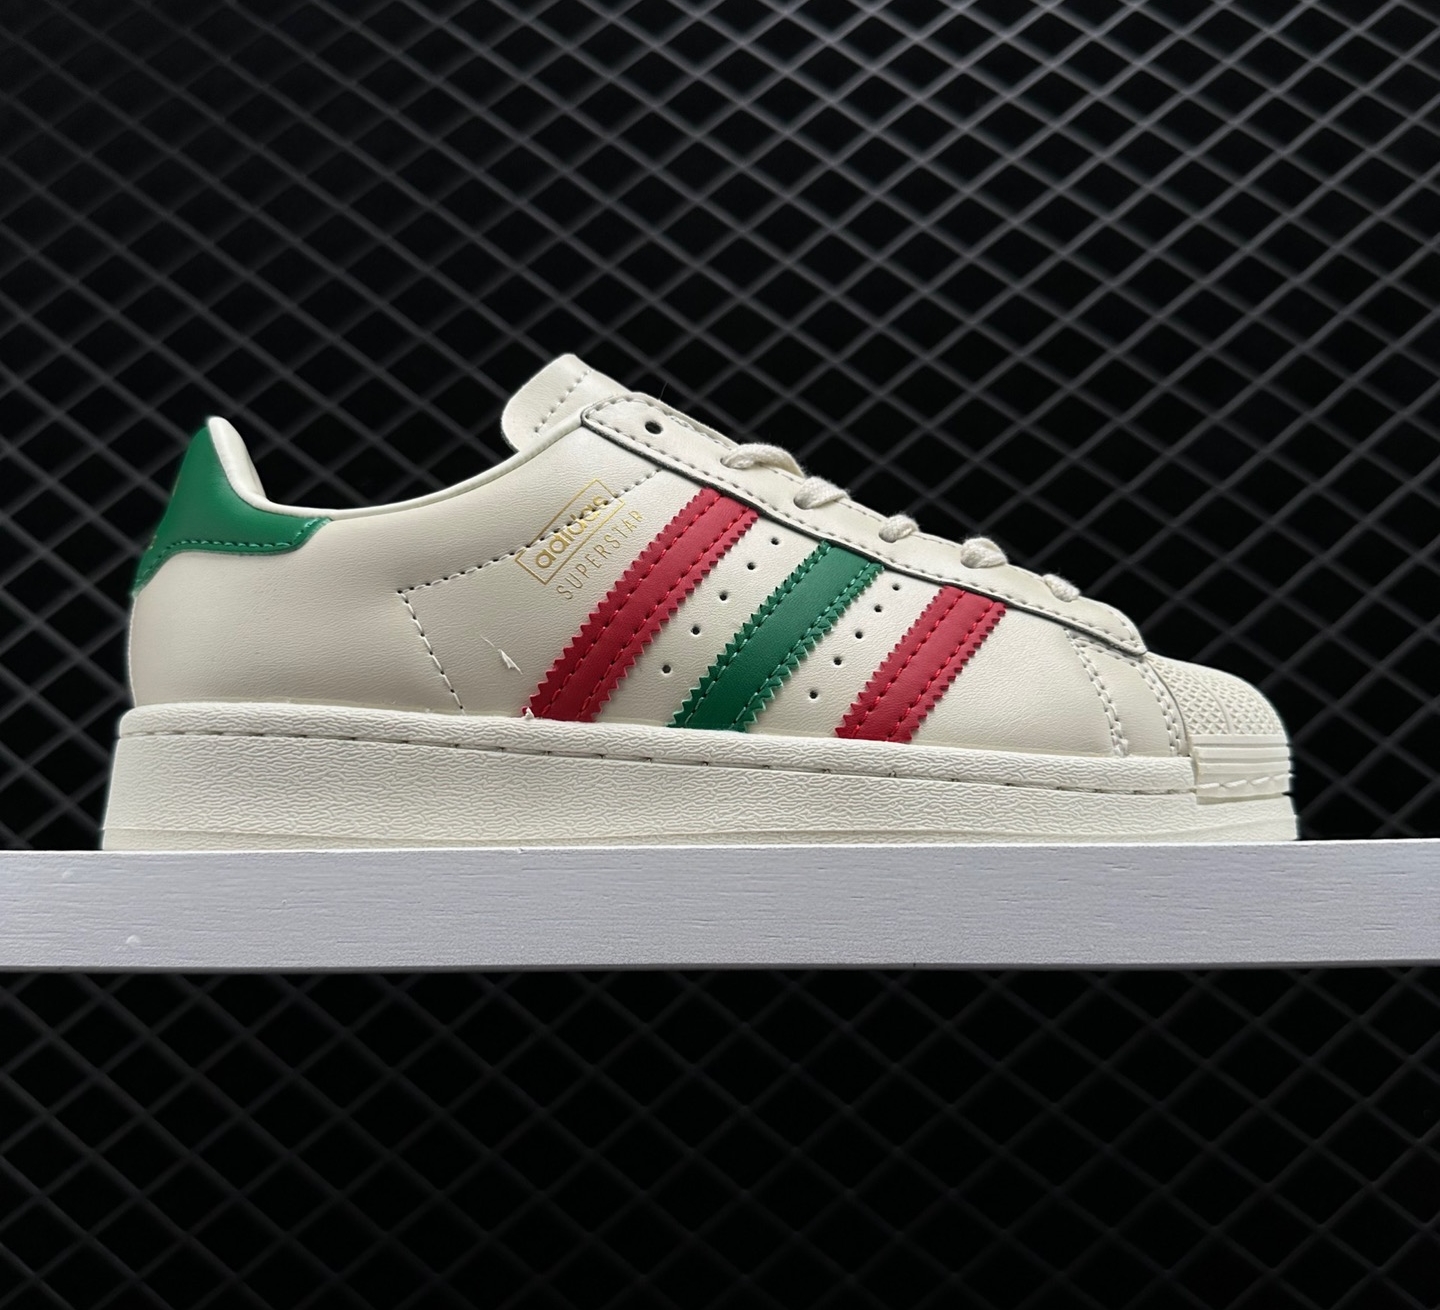 Adidas Originals Superstar White Green Red FZ5435 - Classic Sneakers